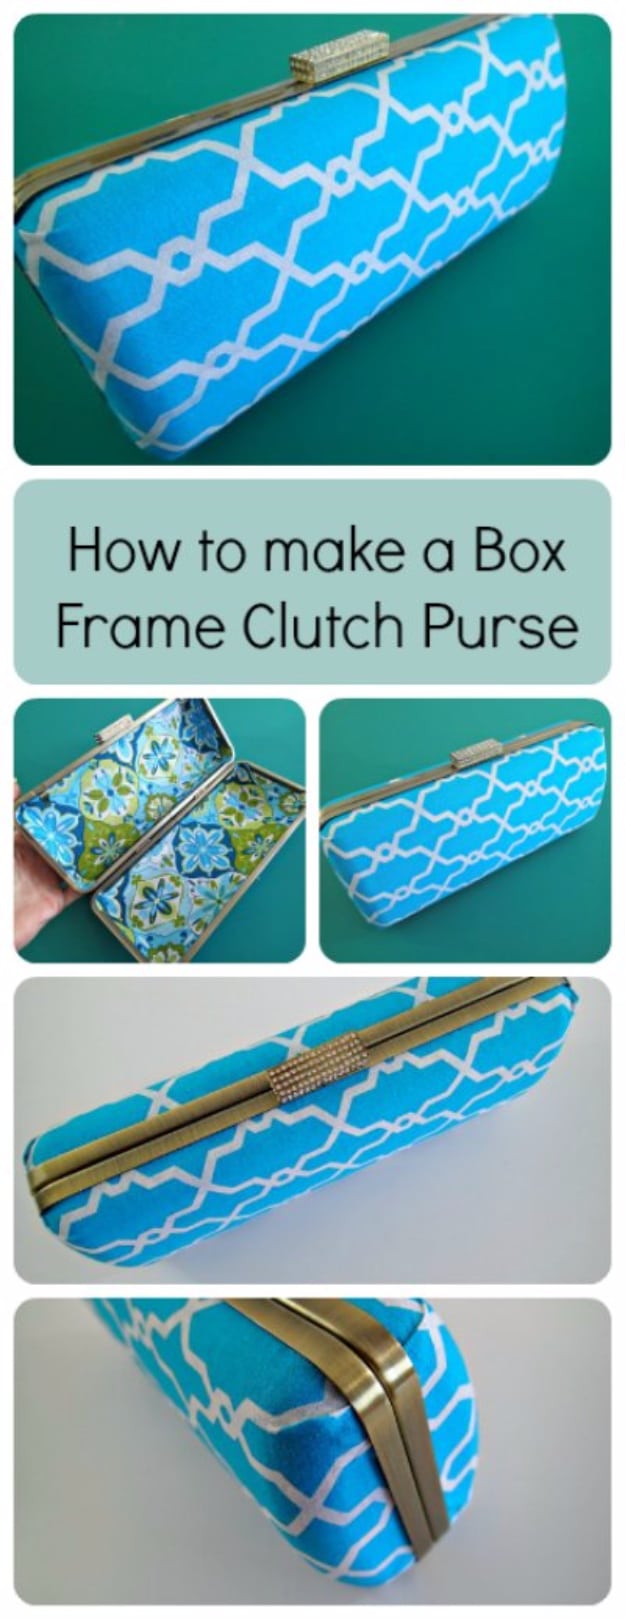 DIY Purses and Handbags - Box Frame Clutch Purse - Homemade Projects to Decorate and Make Purses - Add Paint, Glitter, Buttons and Bling To Your Hand Bags and Purse With These Easy Step by Step Tutorials - Boho, Modern, and Cool Fashion Ideas for Women and Teens #purses #diyclothes #handbags